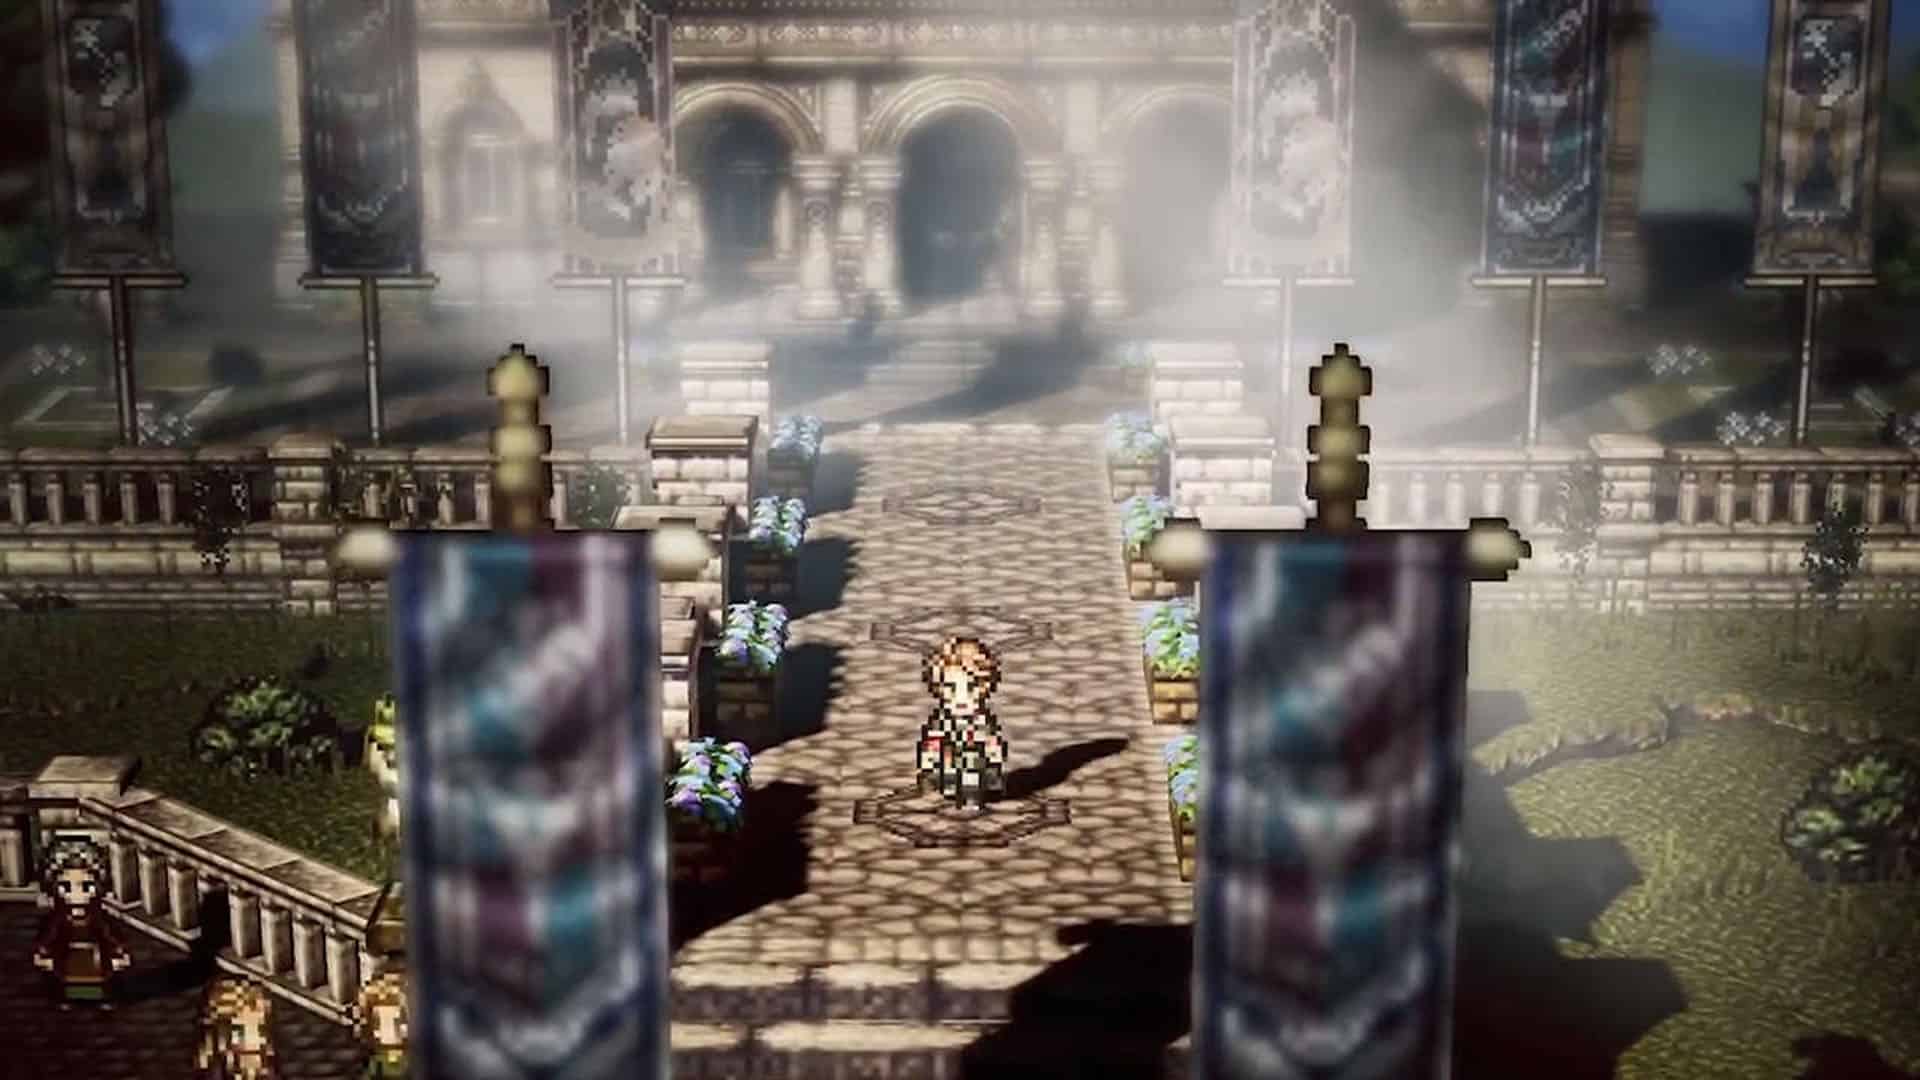 free download octopath traveler champions of the continent beginner guide